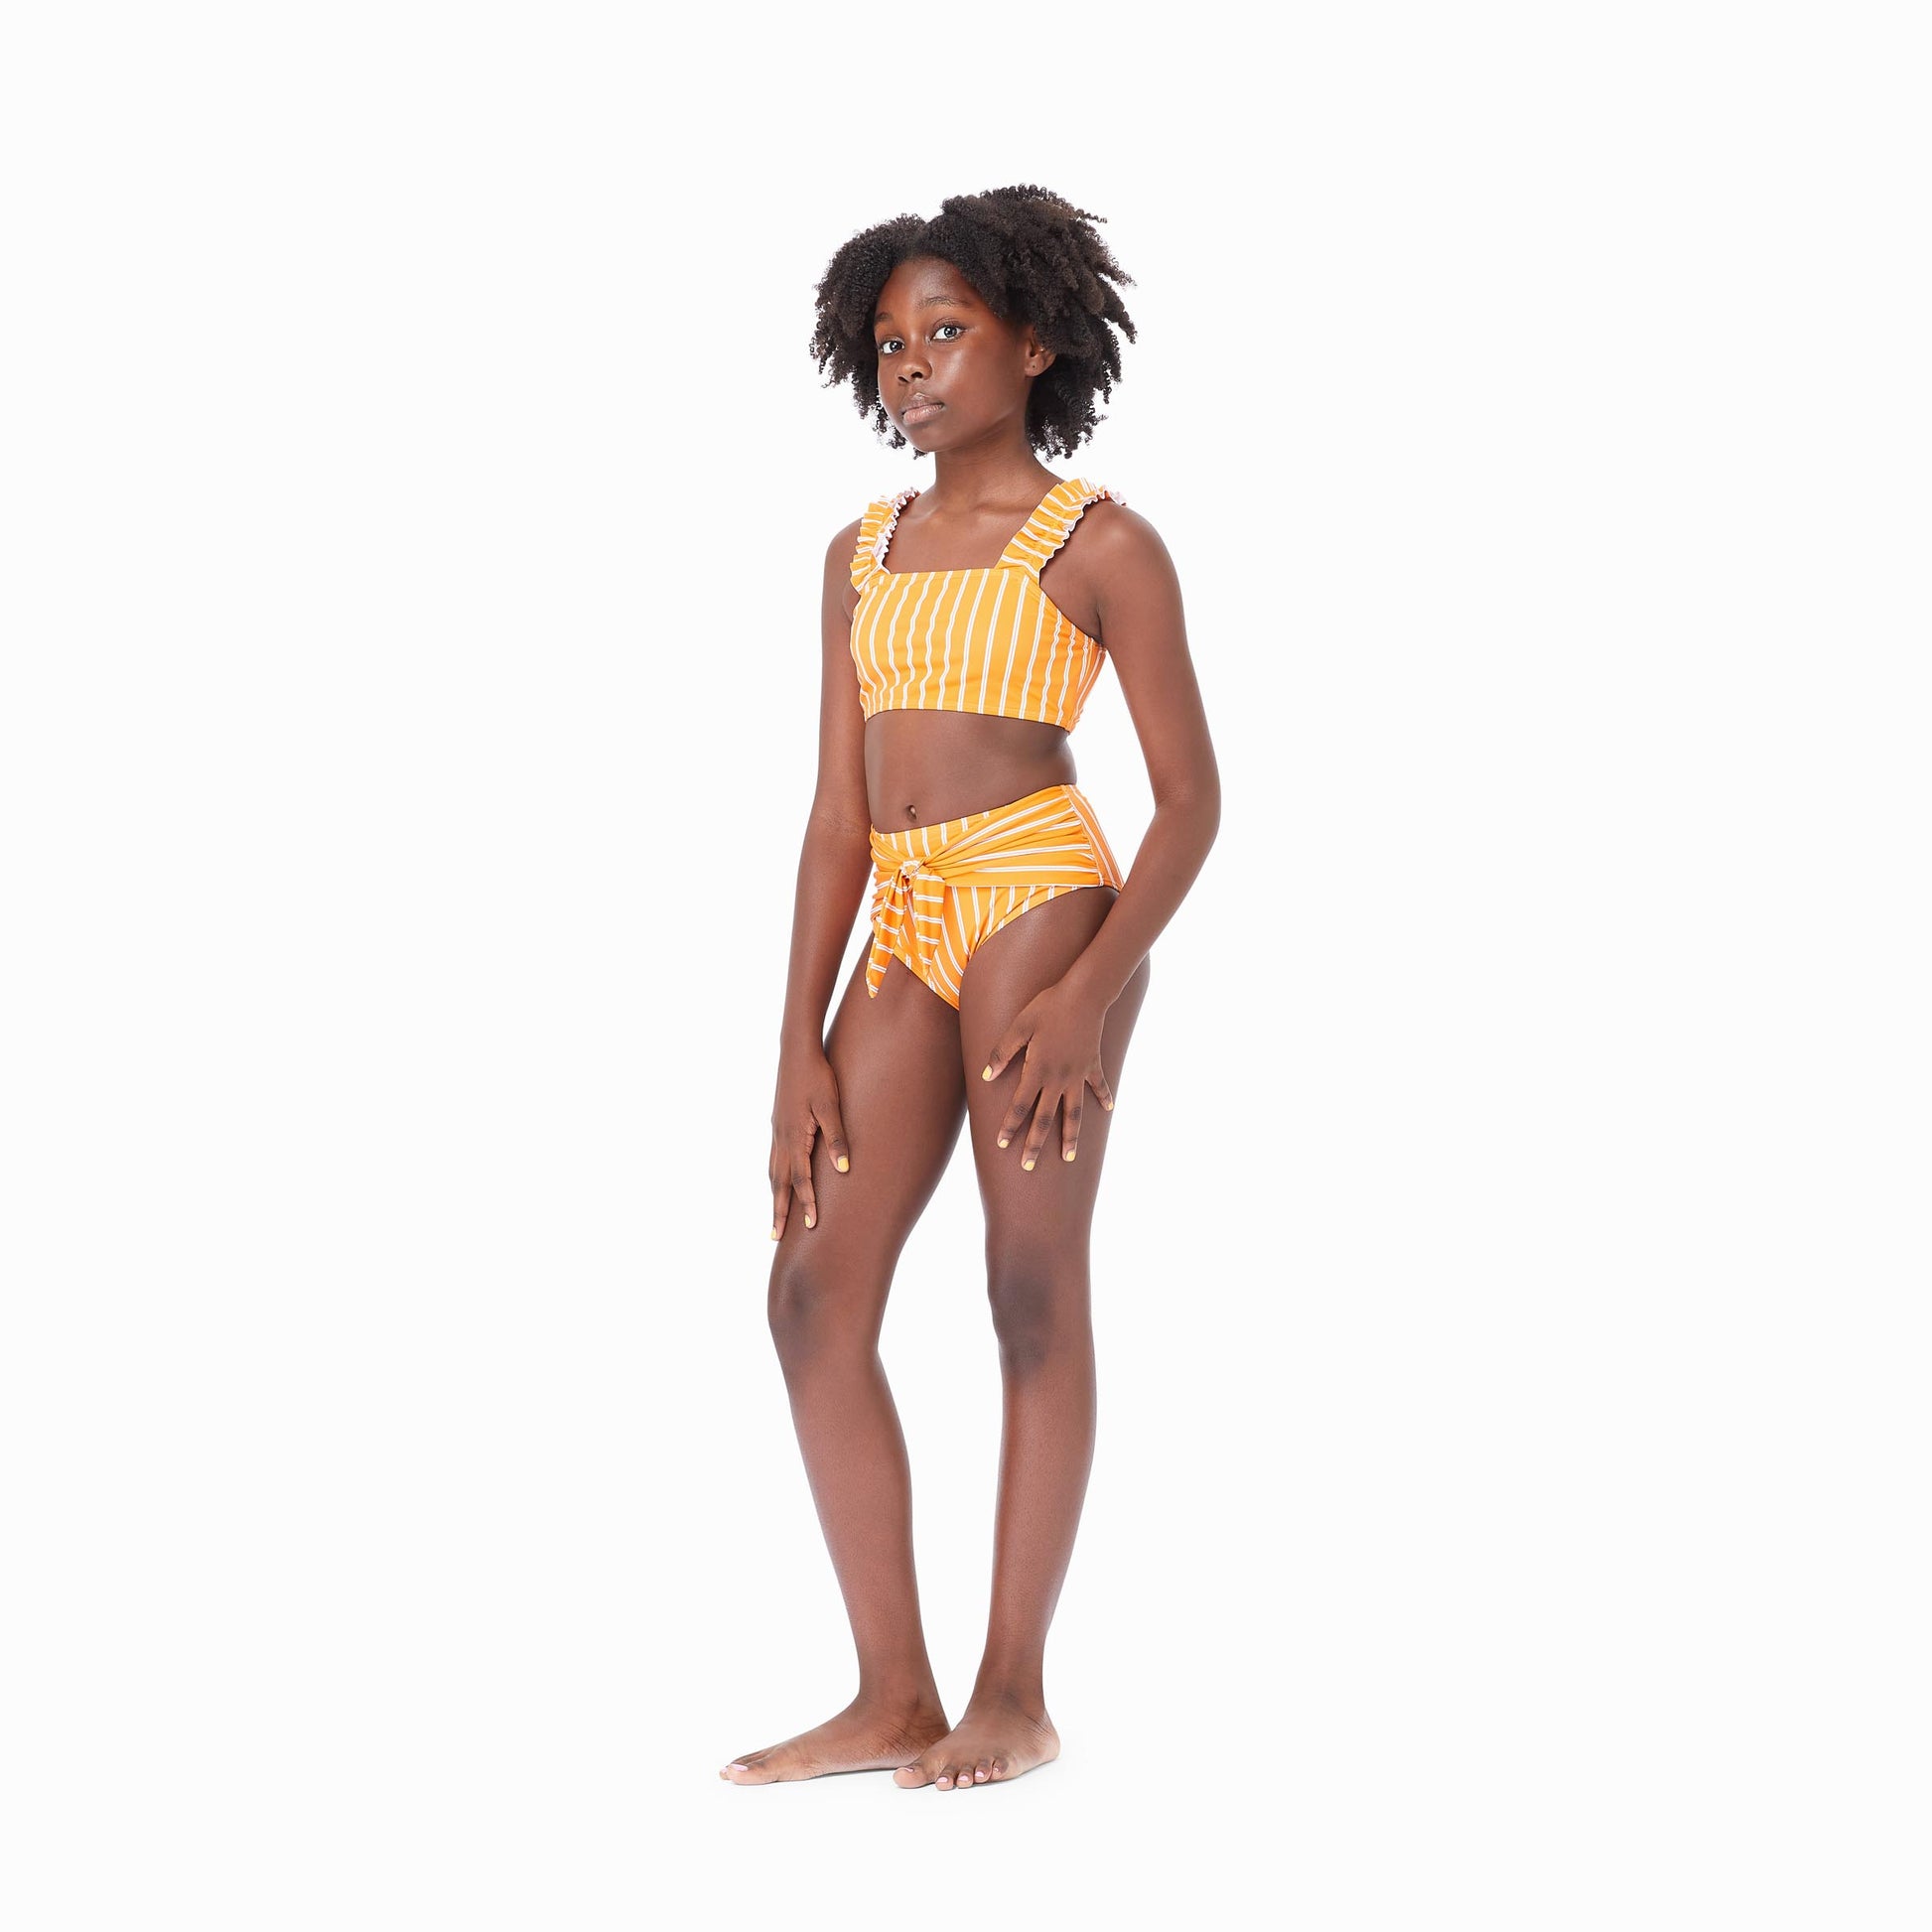 Girl wearing orange two-piece swimsuit with white stripes and bow